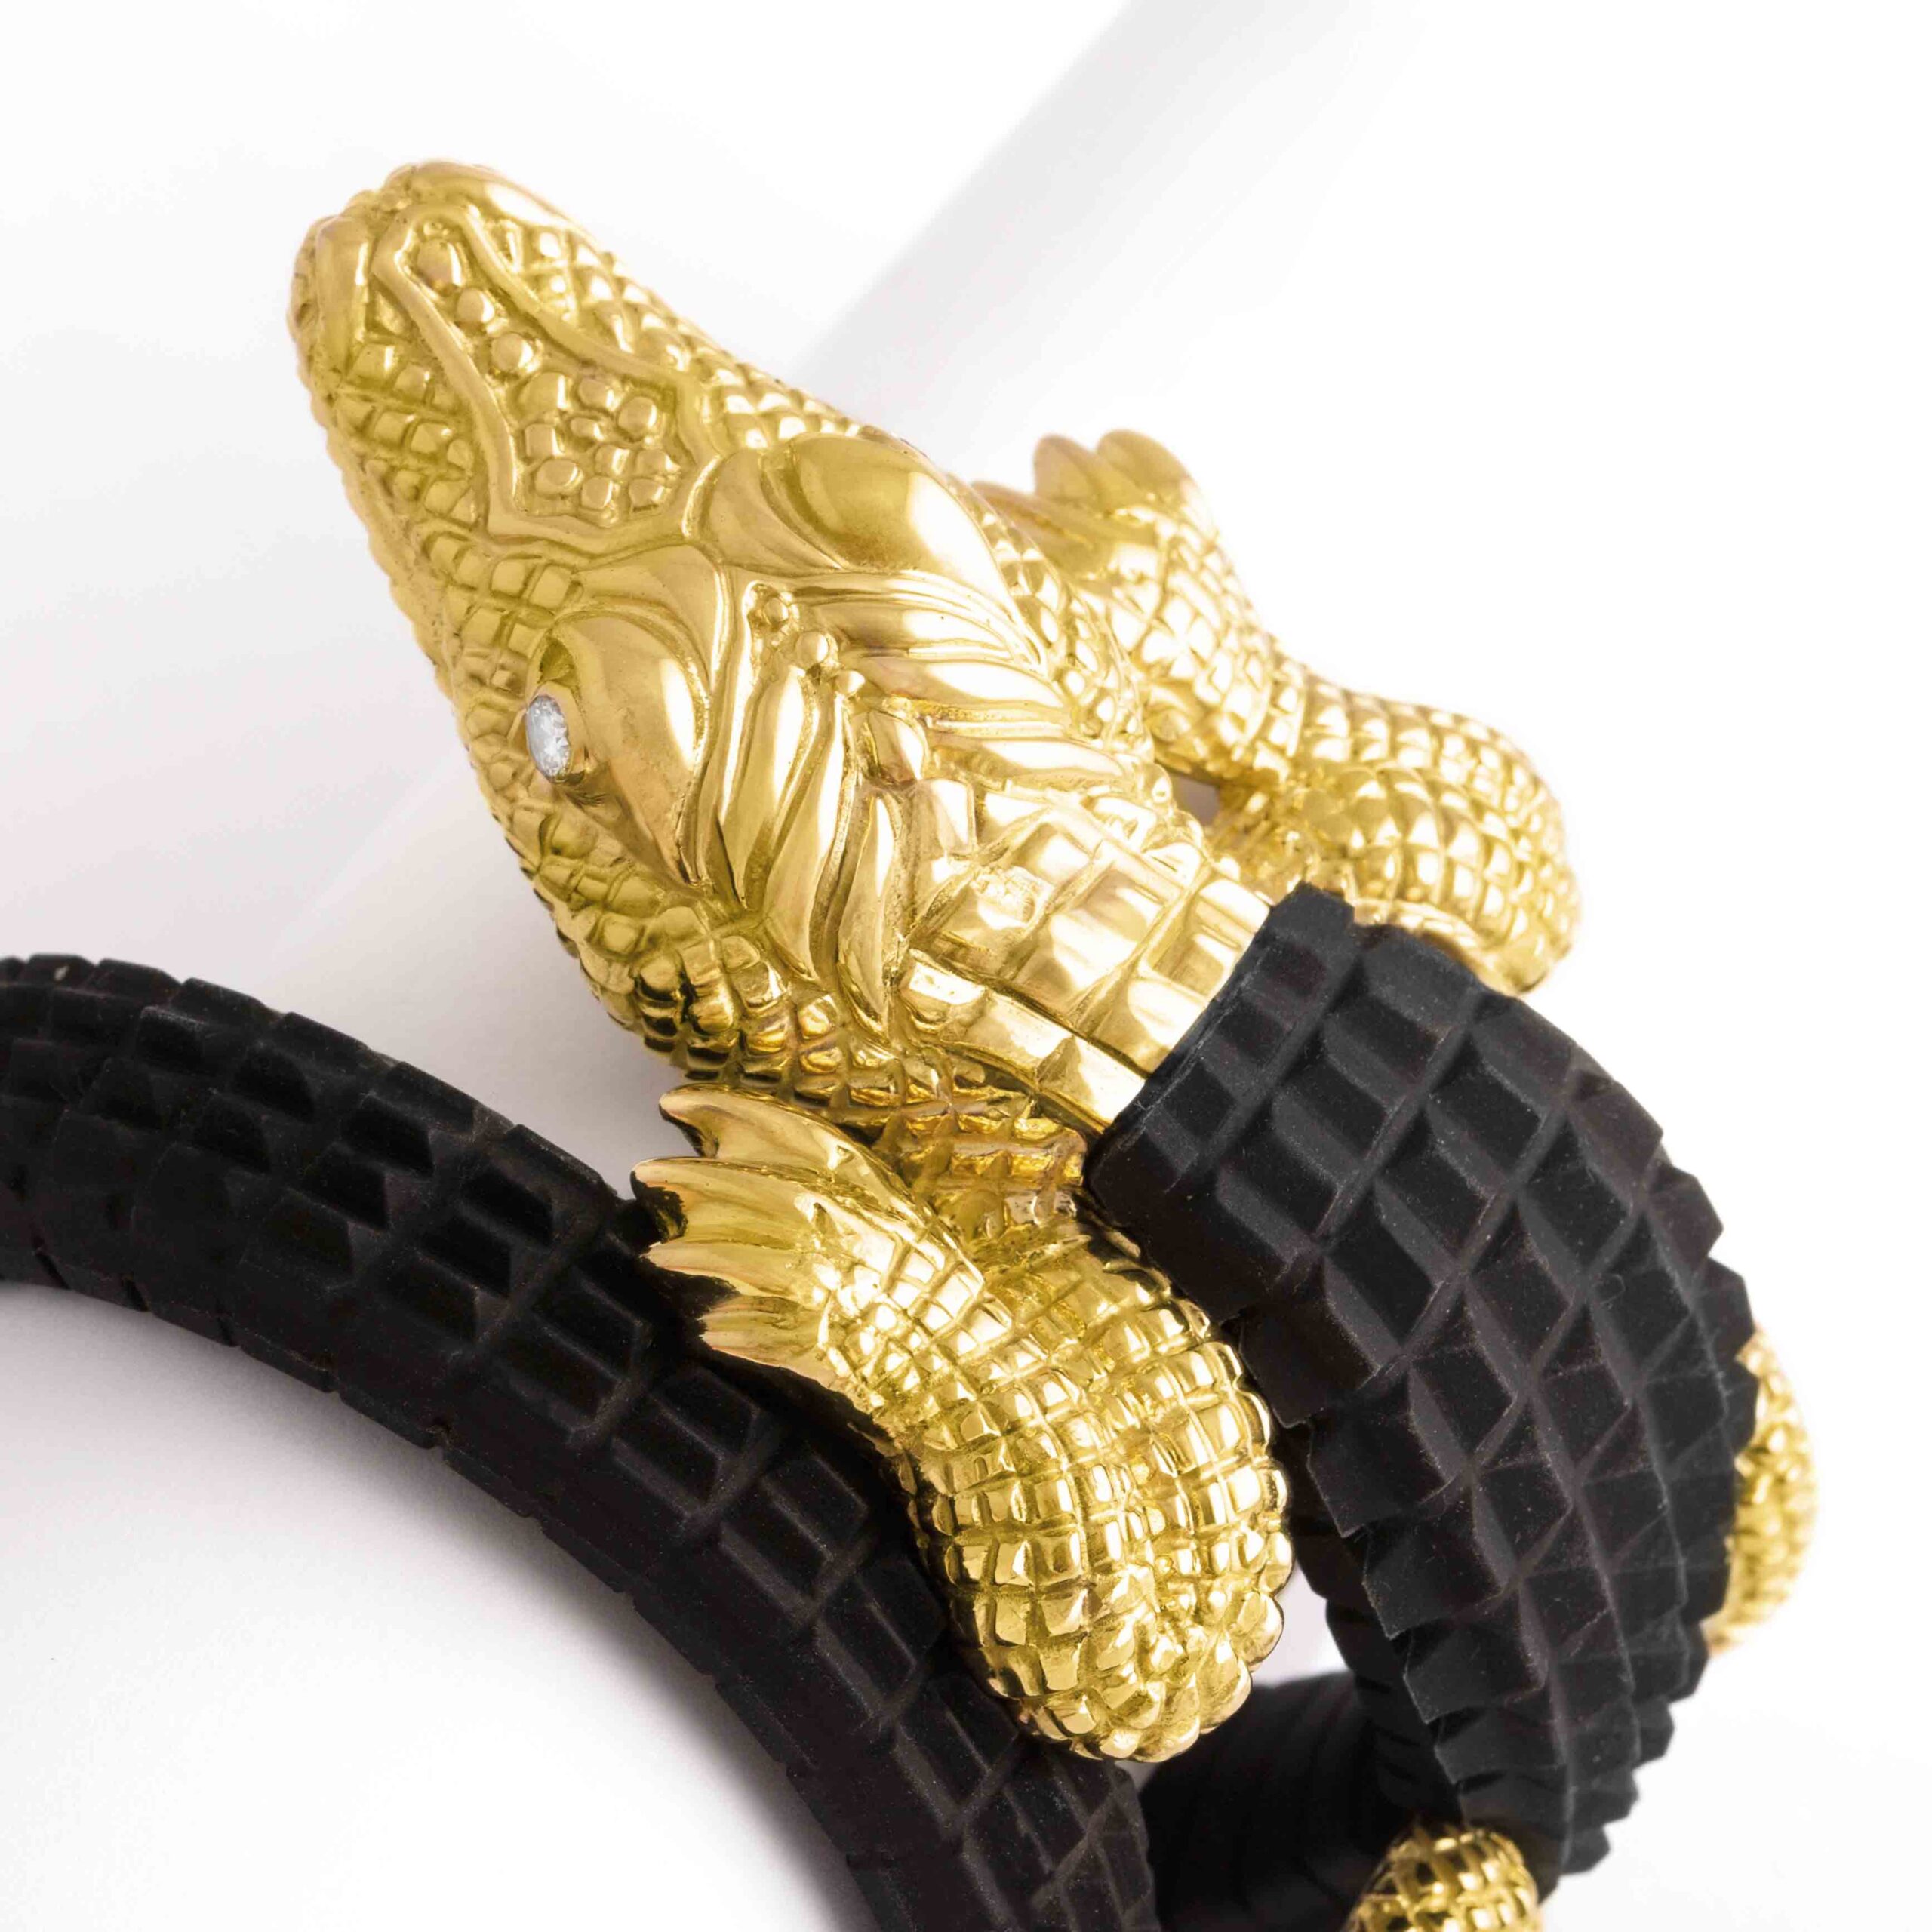 You will want to wrap this artfully sculpted creature around your wrist. Big, bold, and realistically rendered in 18K yellow gold and black rubber, this remarkable reptile has a satiny finish with shimmering highlights. The eyes are set with diamonds. The head and the feet only are in yellow gold 18K. The black rubber is brand new. It is easily removable from the spring inside so as to be changed in different colors. The overall bracelet is flexible. Unique piece